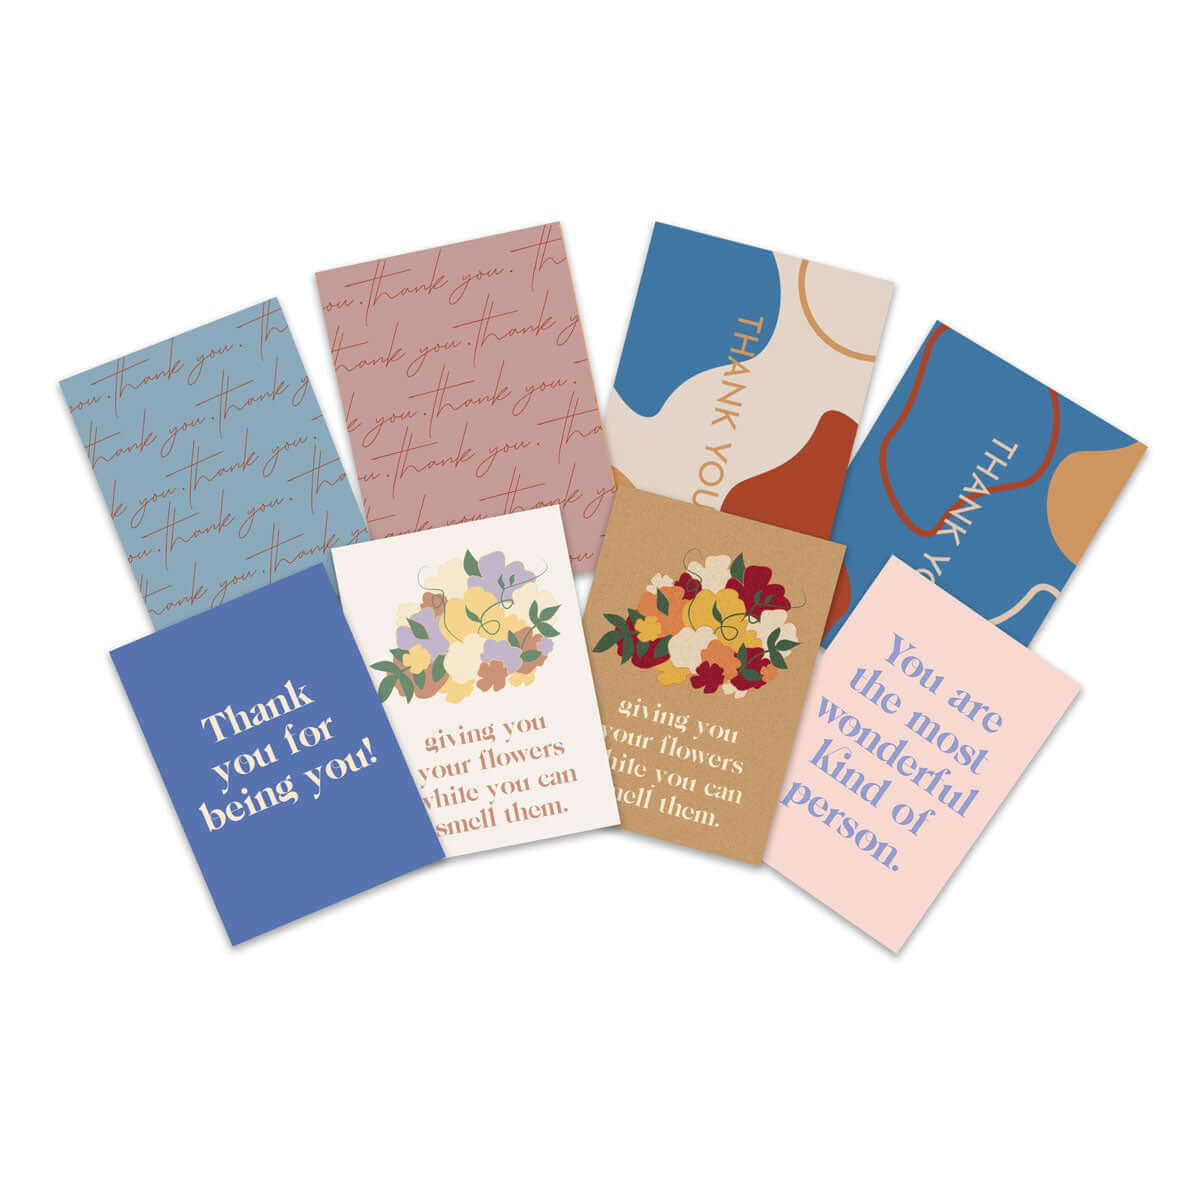 full set of 8 Thank you cards showcased next to each other showing everything included in the bundle